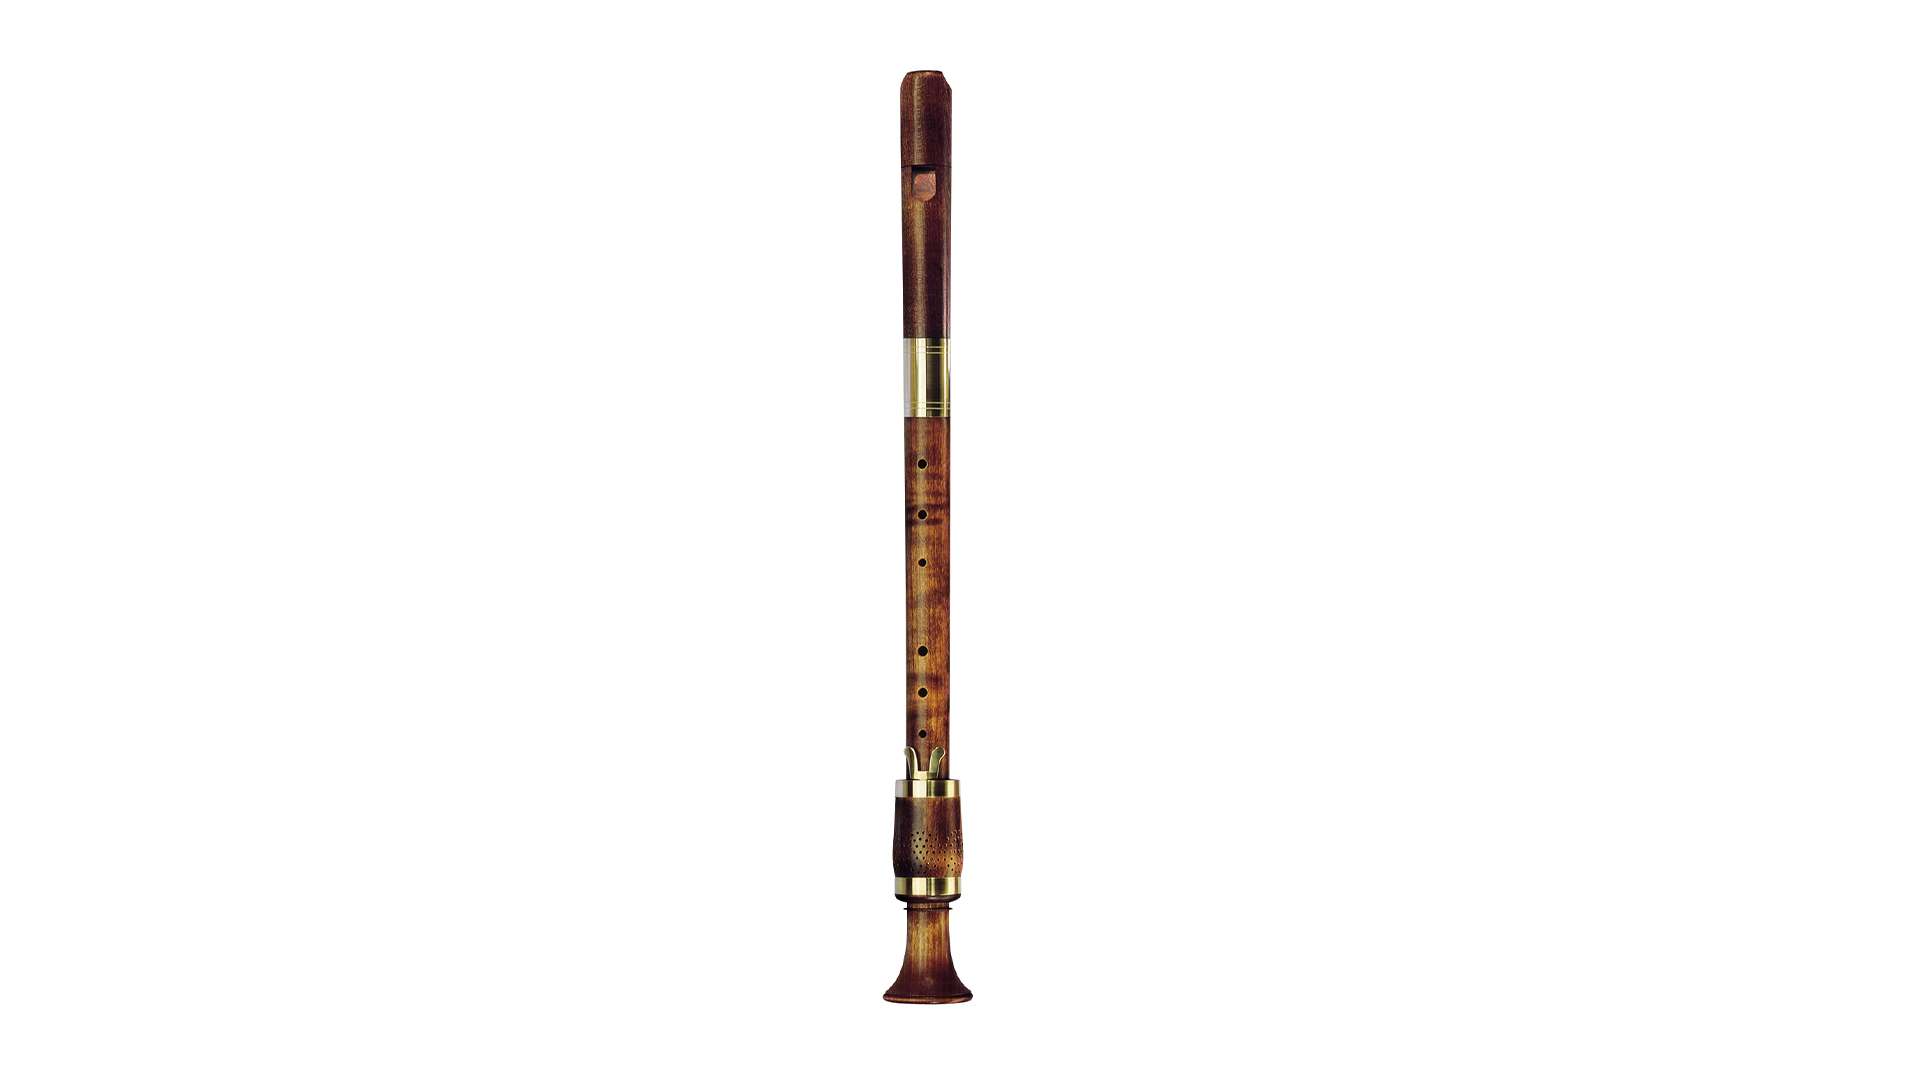 Moeck, "Renaissance Consort", tenor in c', baroque single hole, with single key and fontanelle, 442